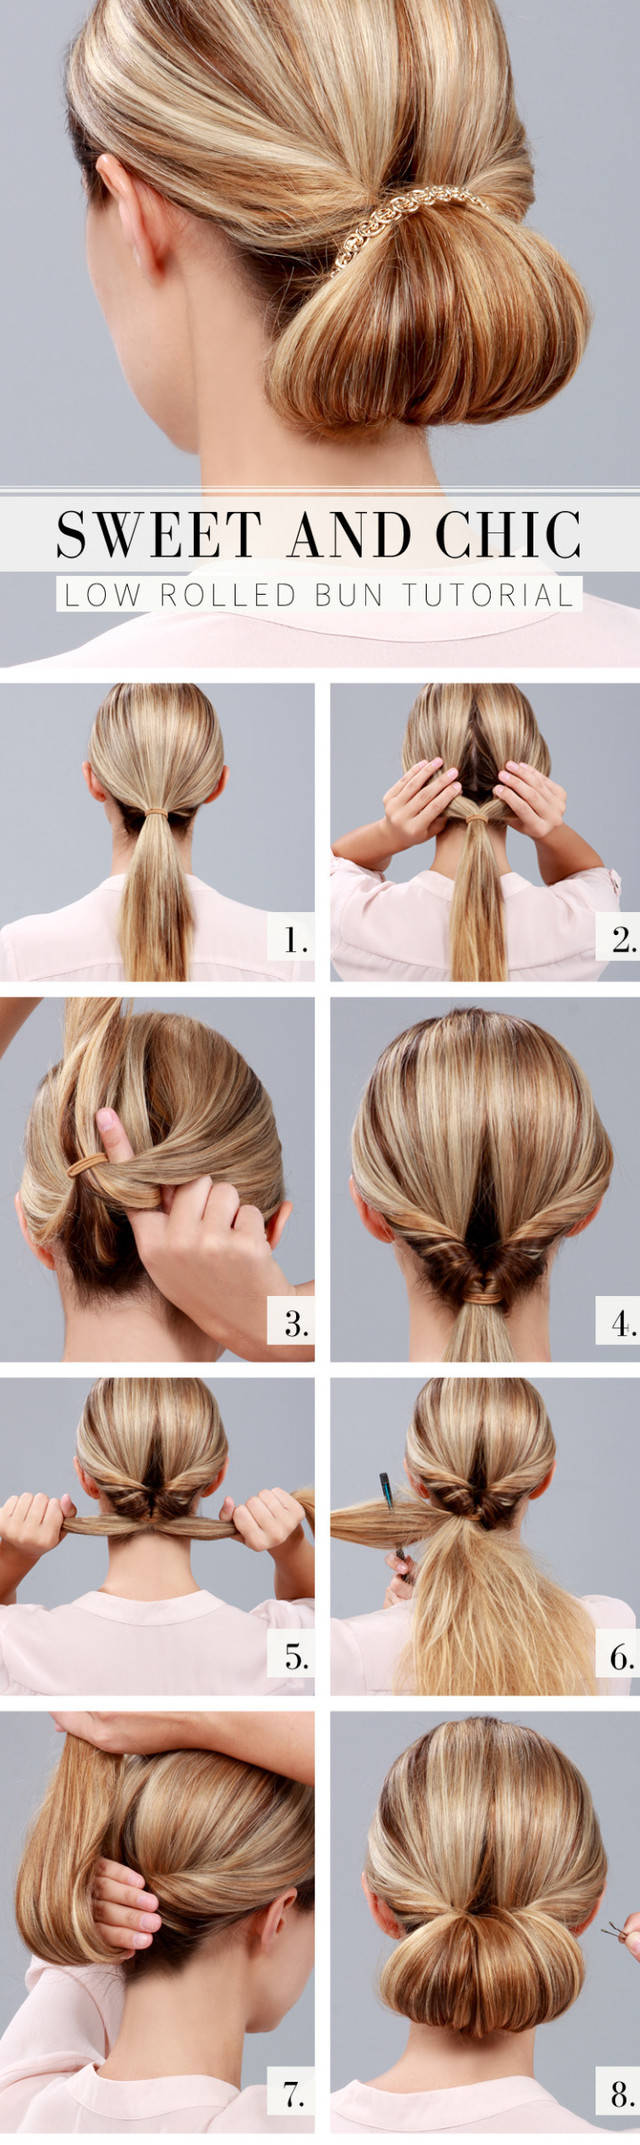 1440490306 low rolled bun hairstyle tutorial 720x2413